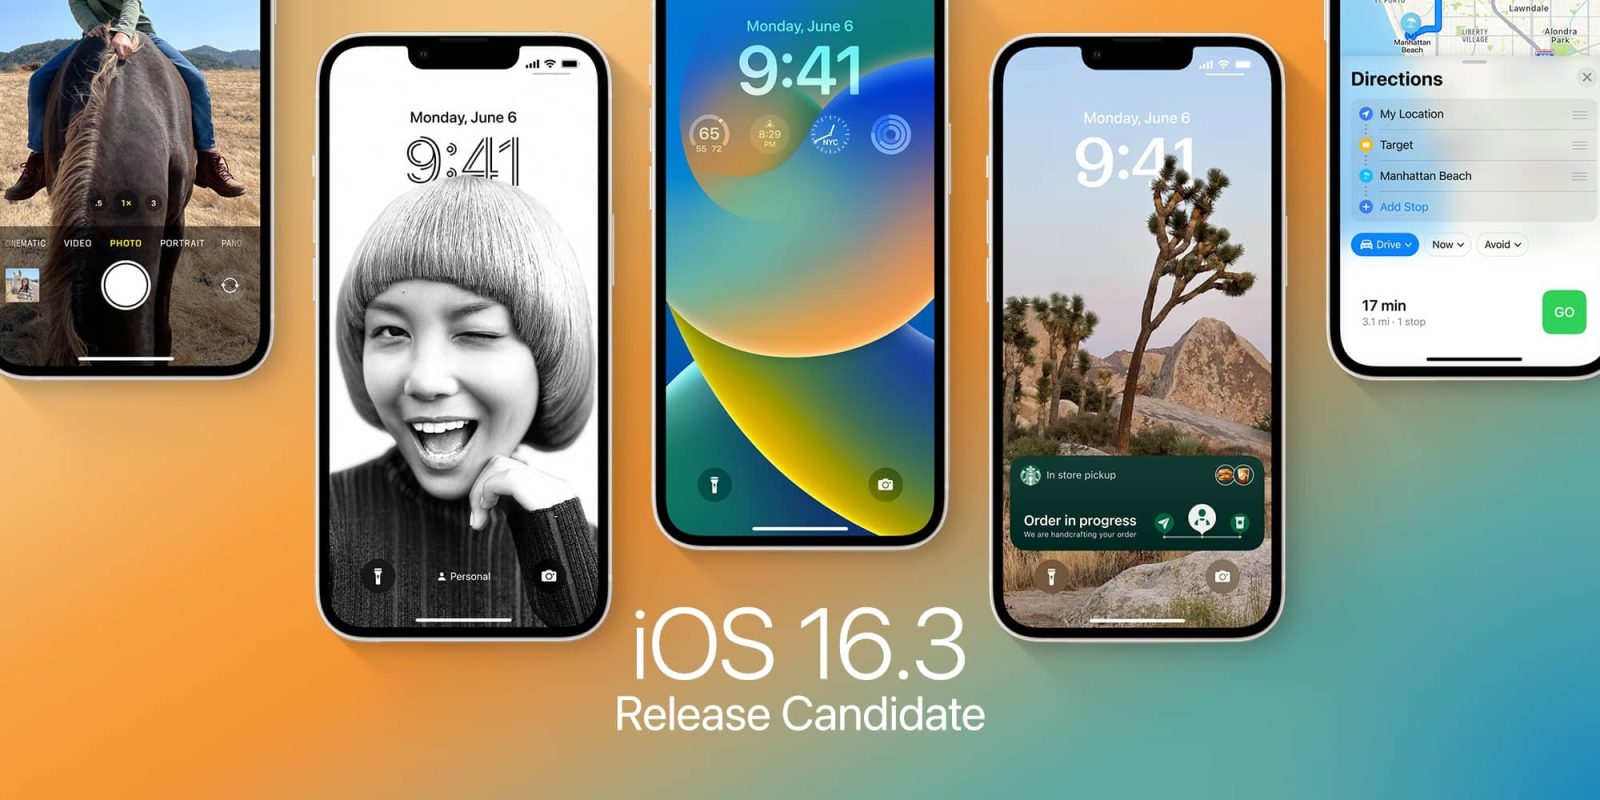 Apple releases iOS 16.3 RC to developers ahead of public release next week